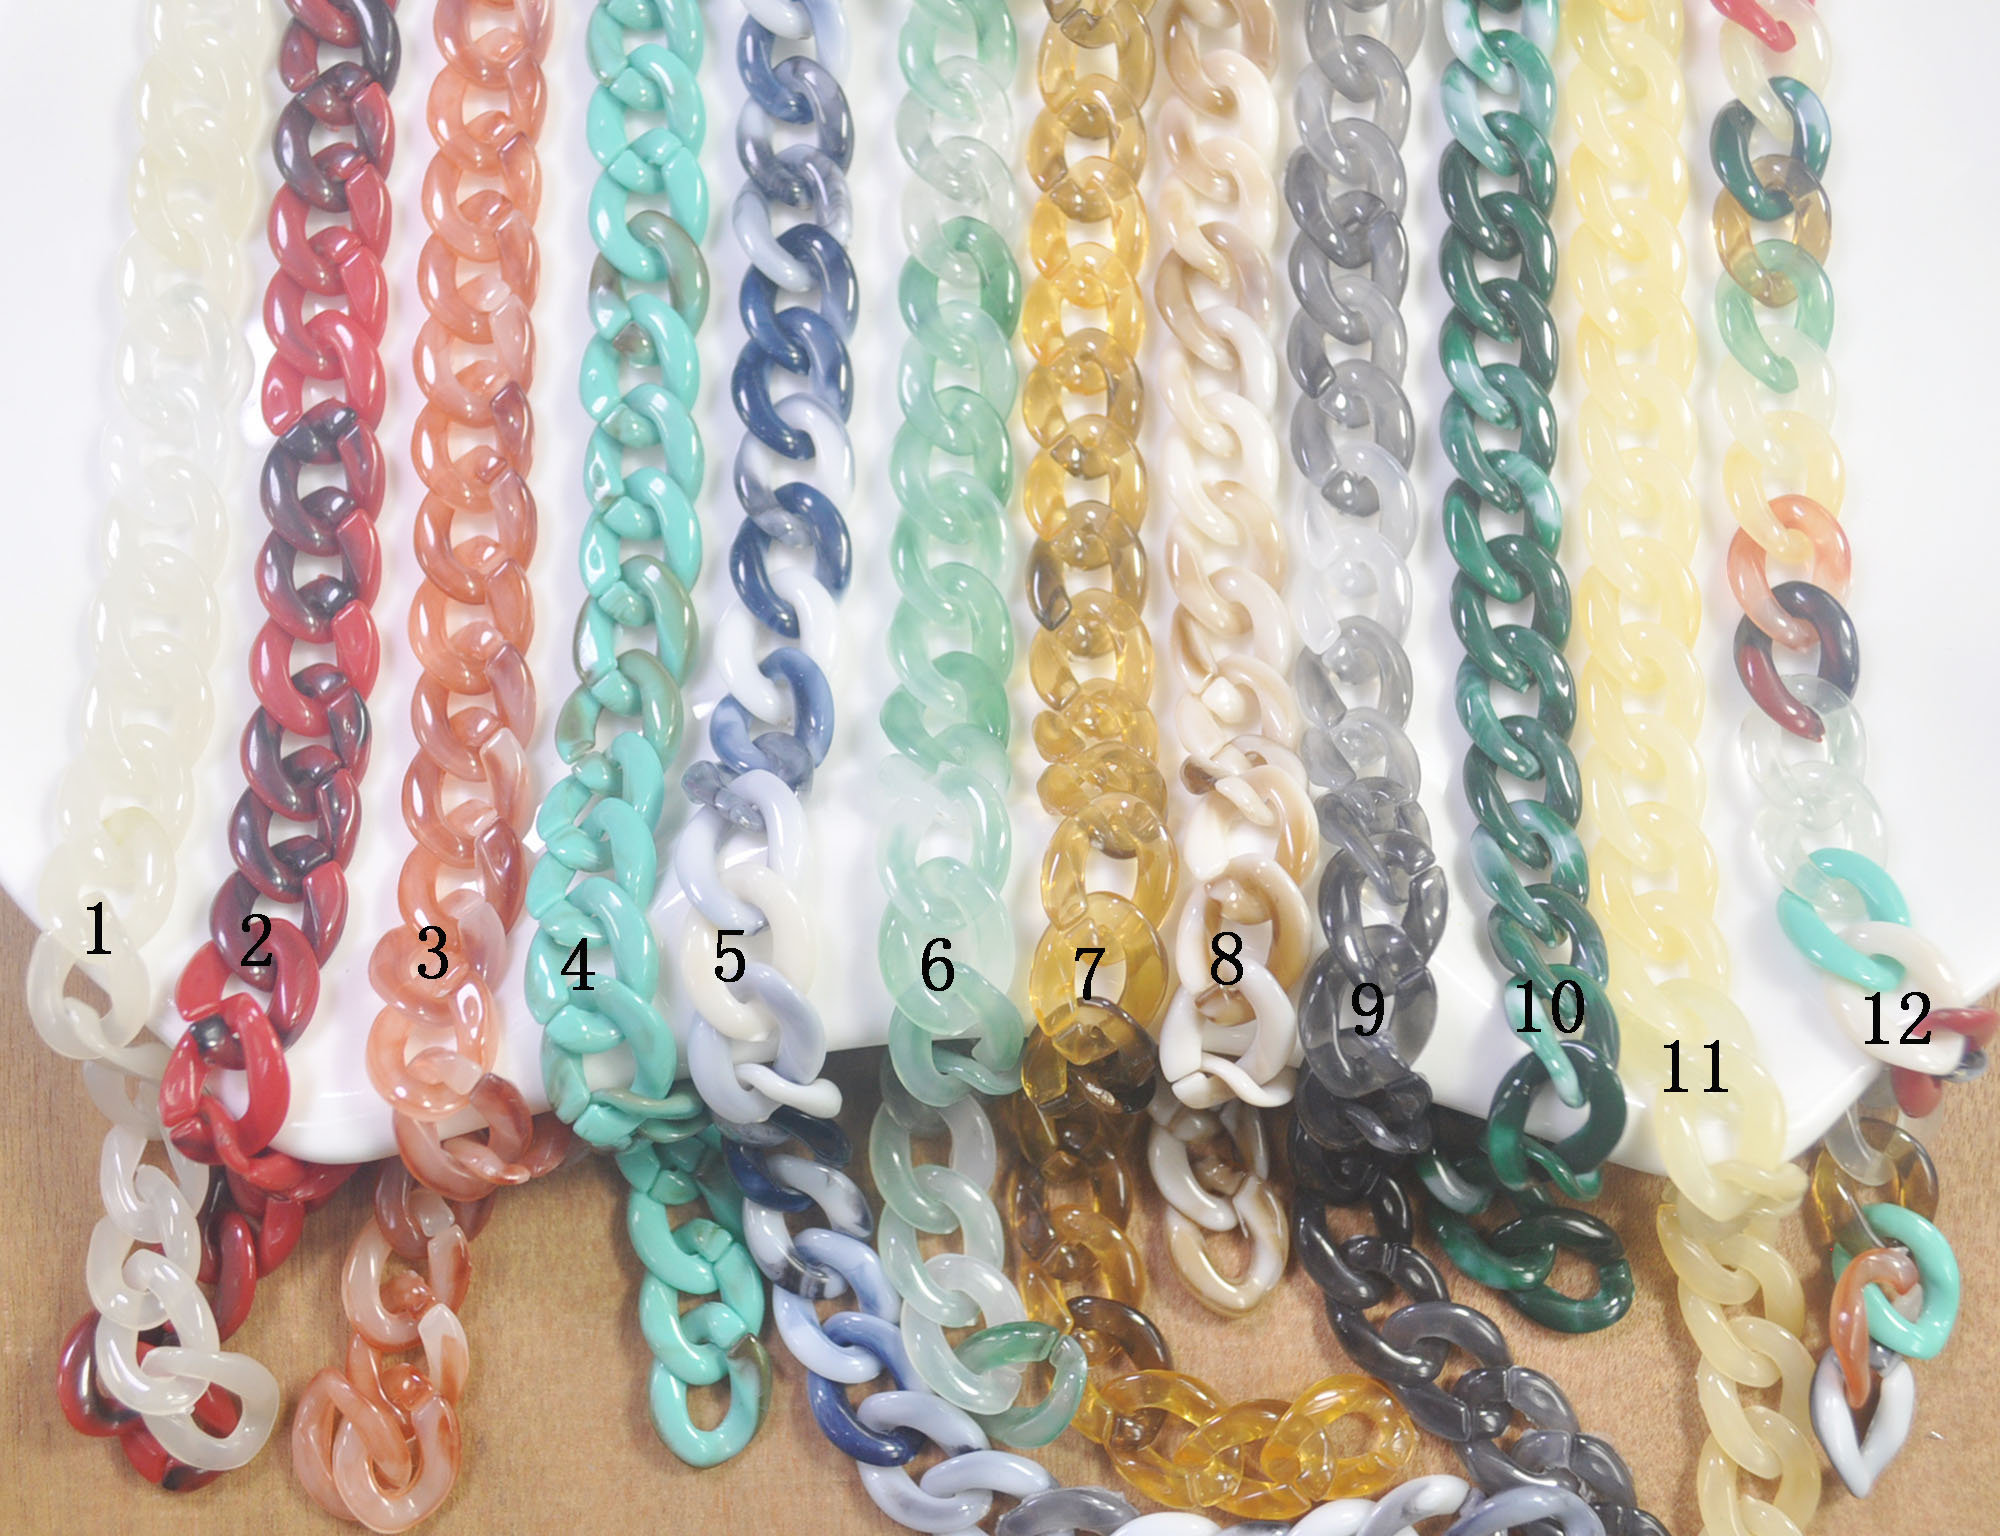 50 Jewelry Plastic Chain Links, Assorted Color Chunky Twist Open Chain  Links 20x29mm 